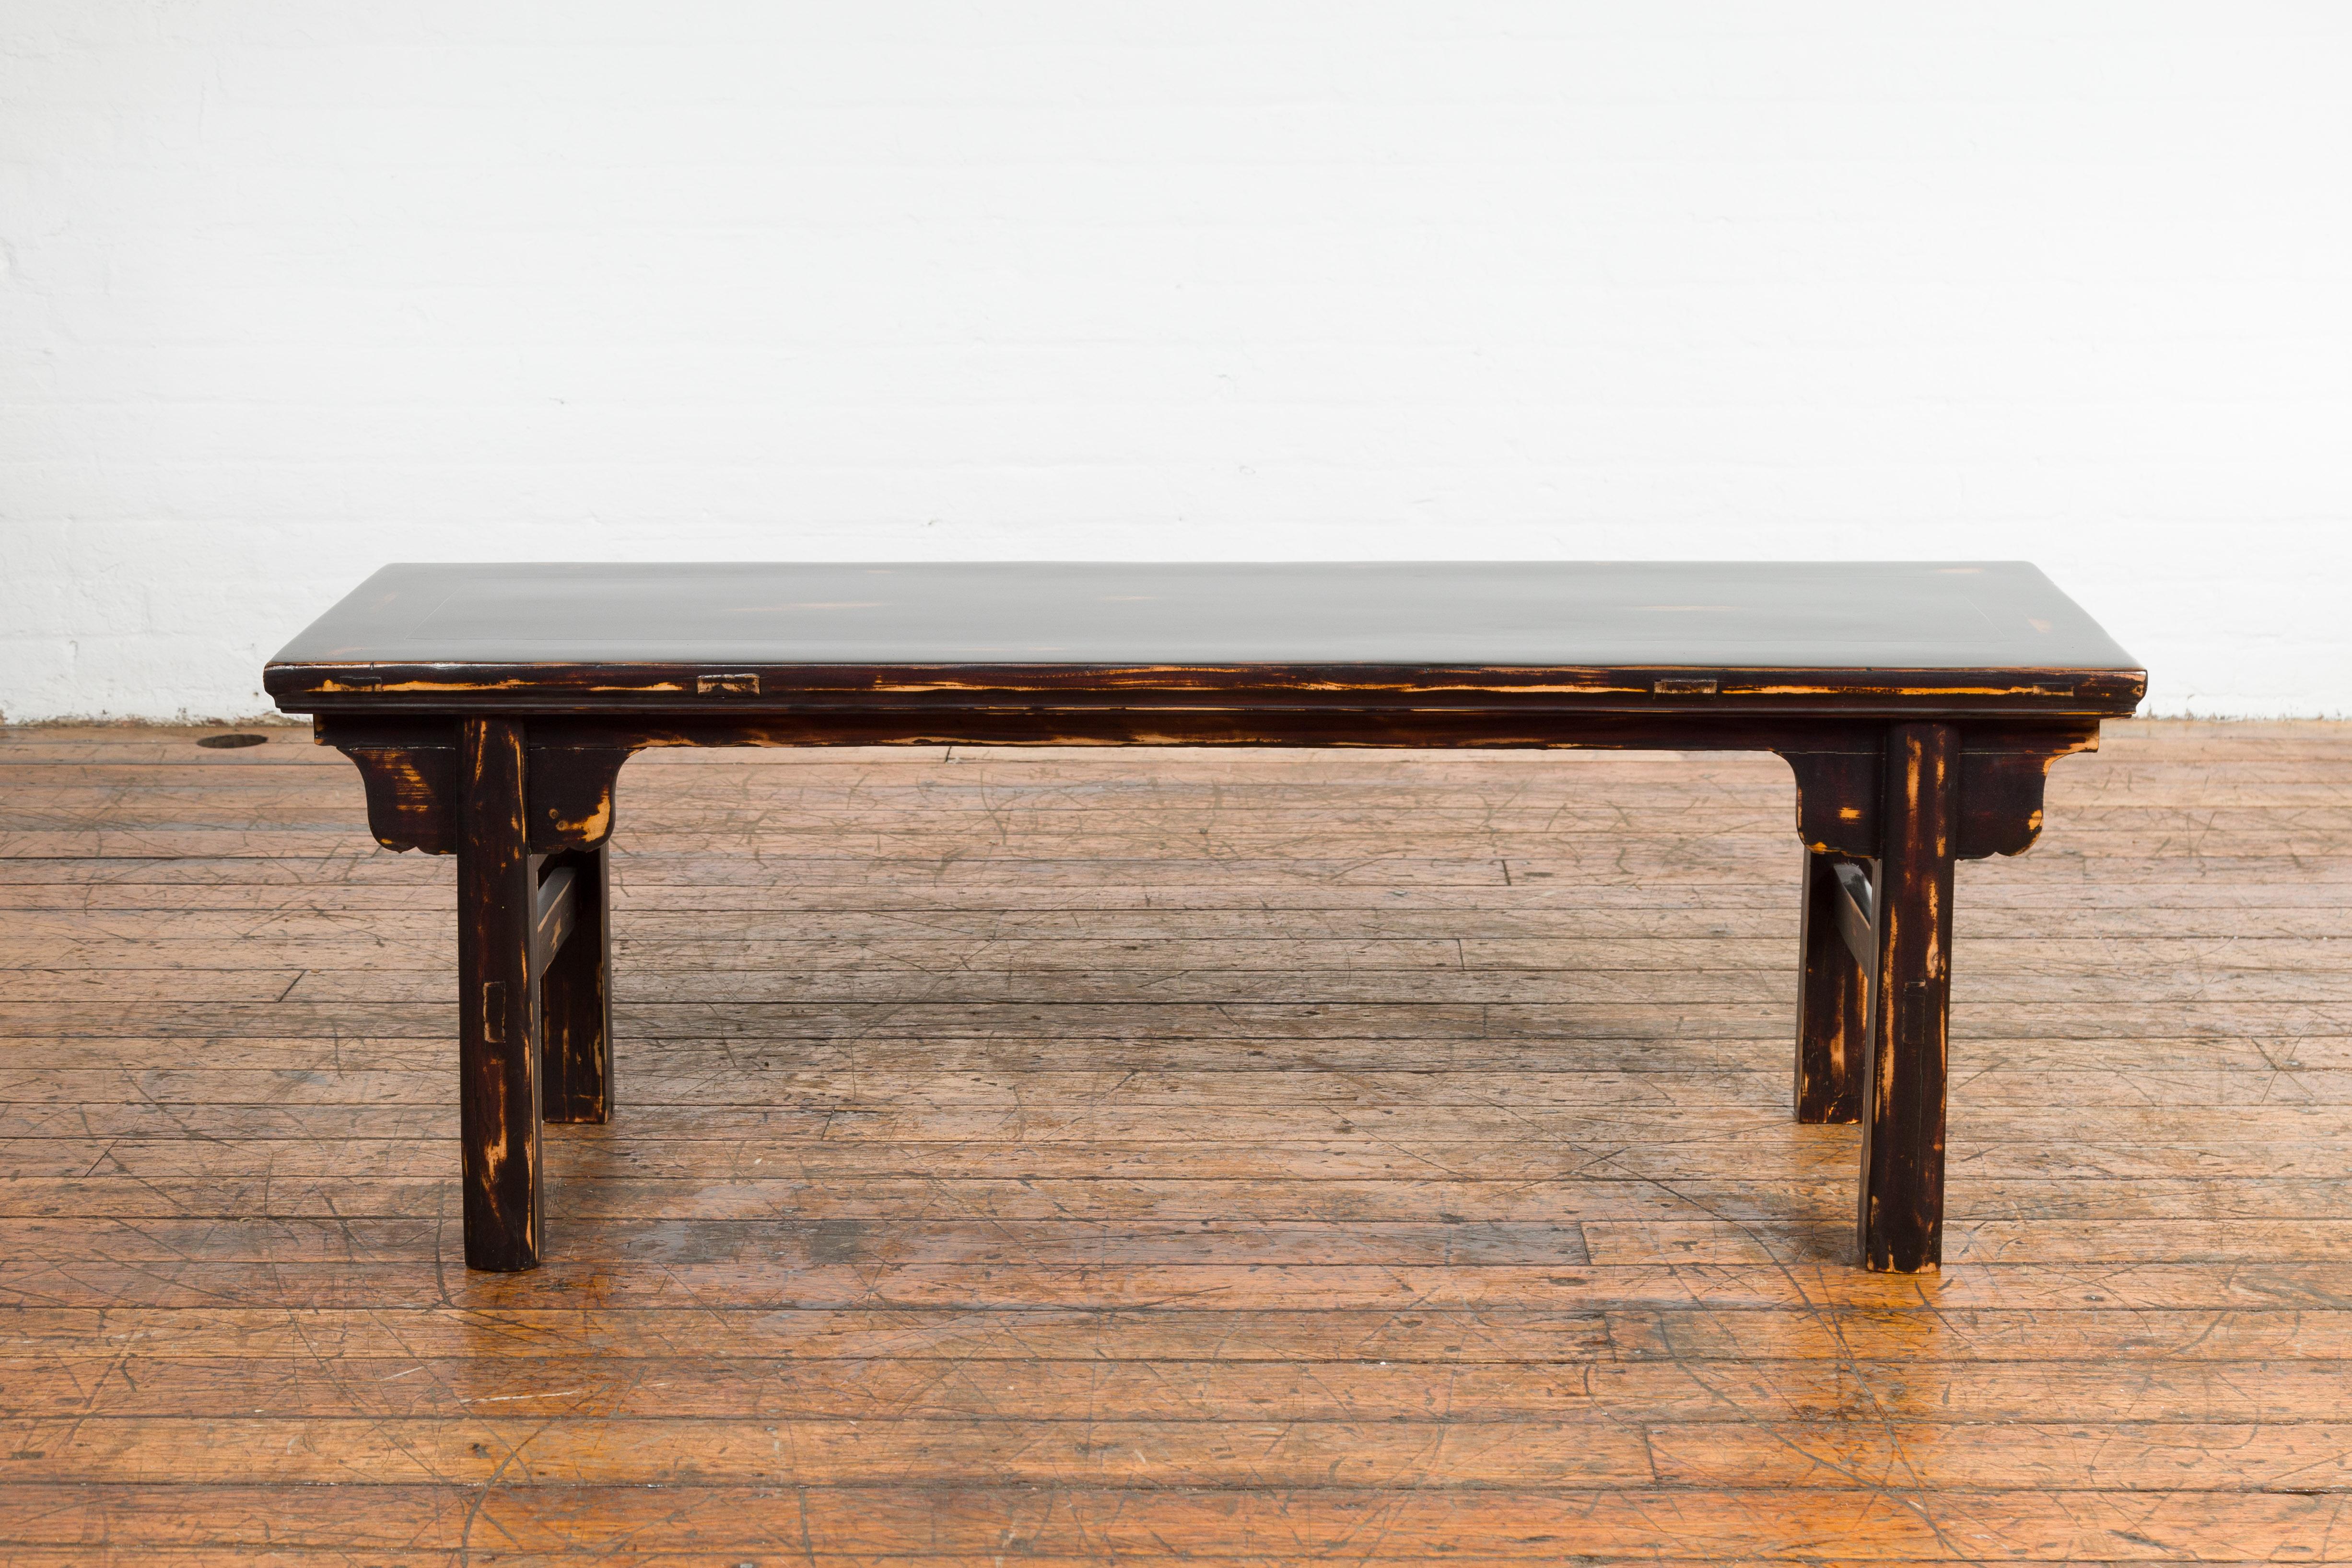 Wood Chinese Qing Dynasty Low Table or Bench with Custom Dark Brown Lacquer Finish For Sale